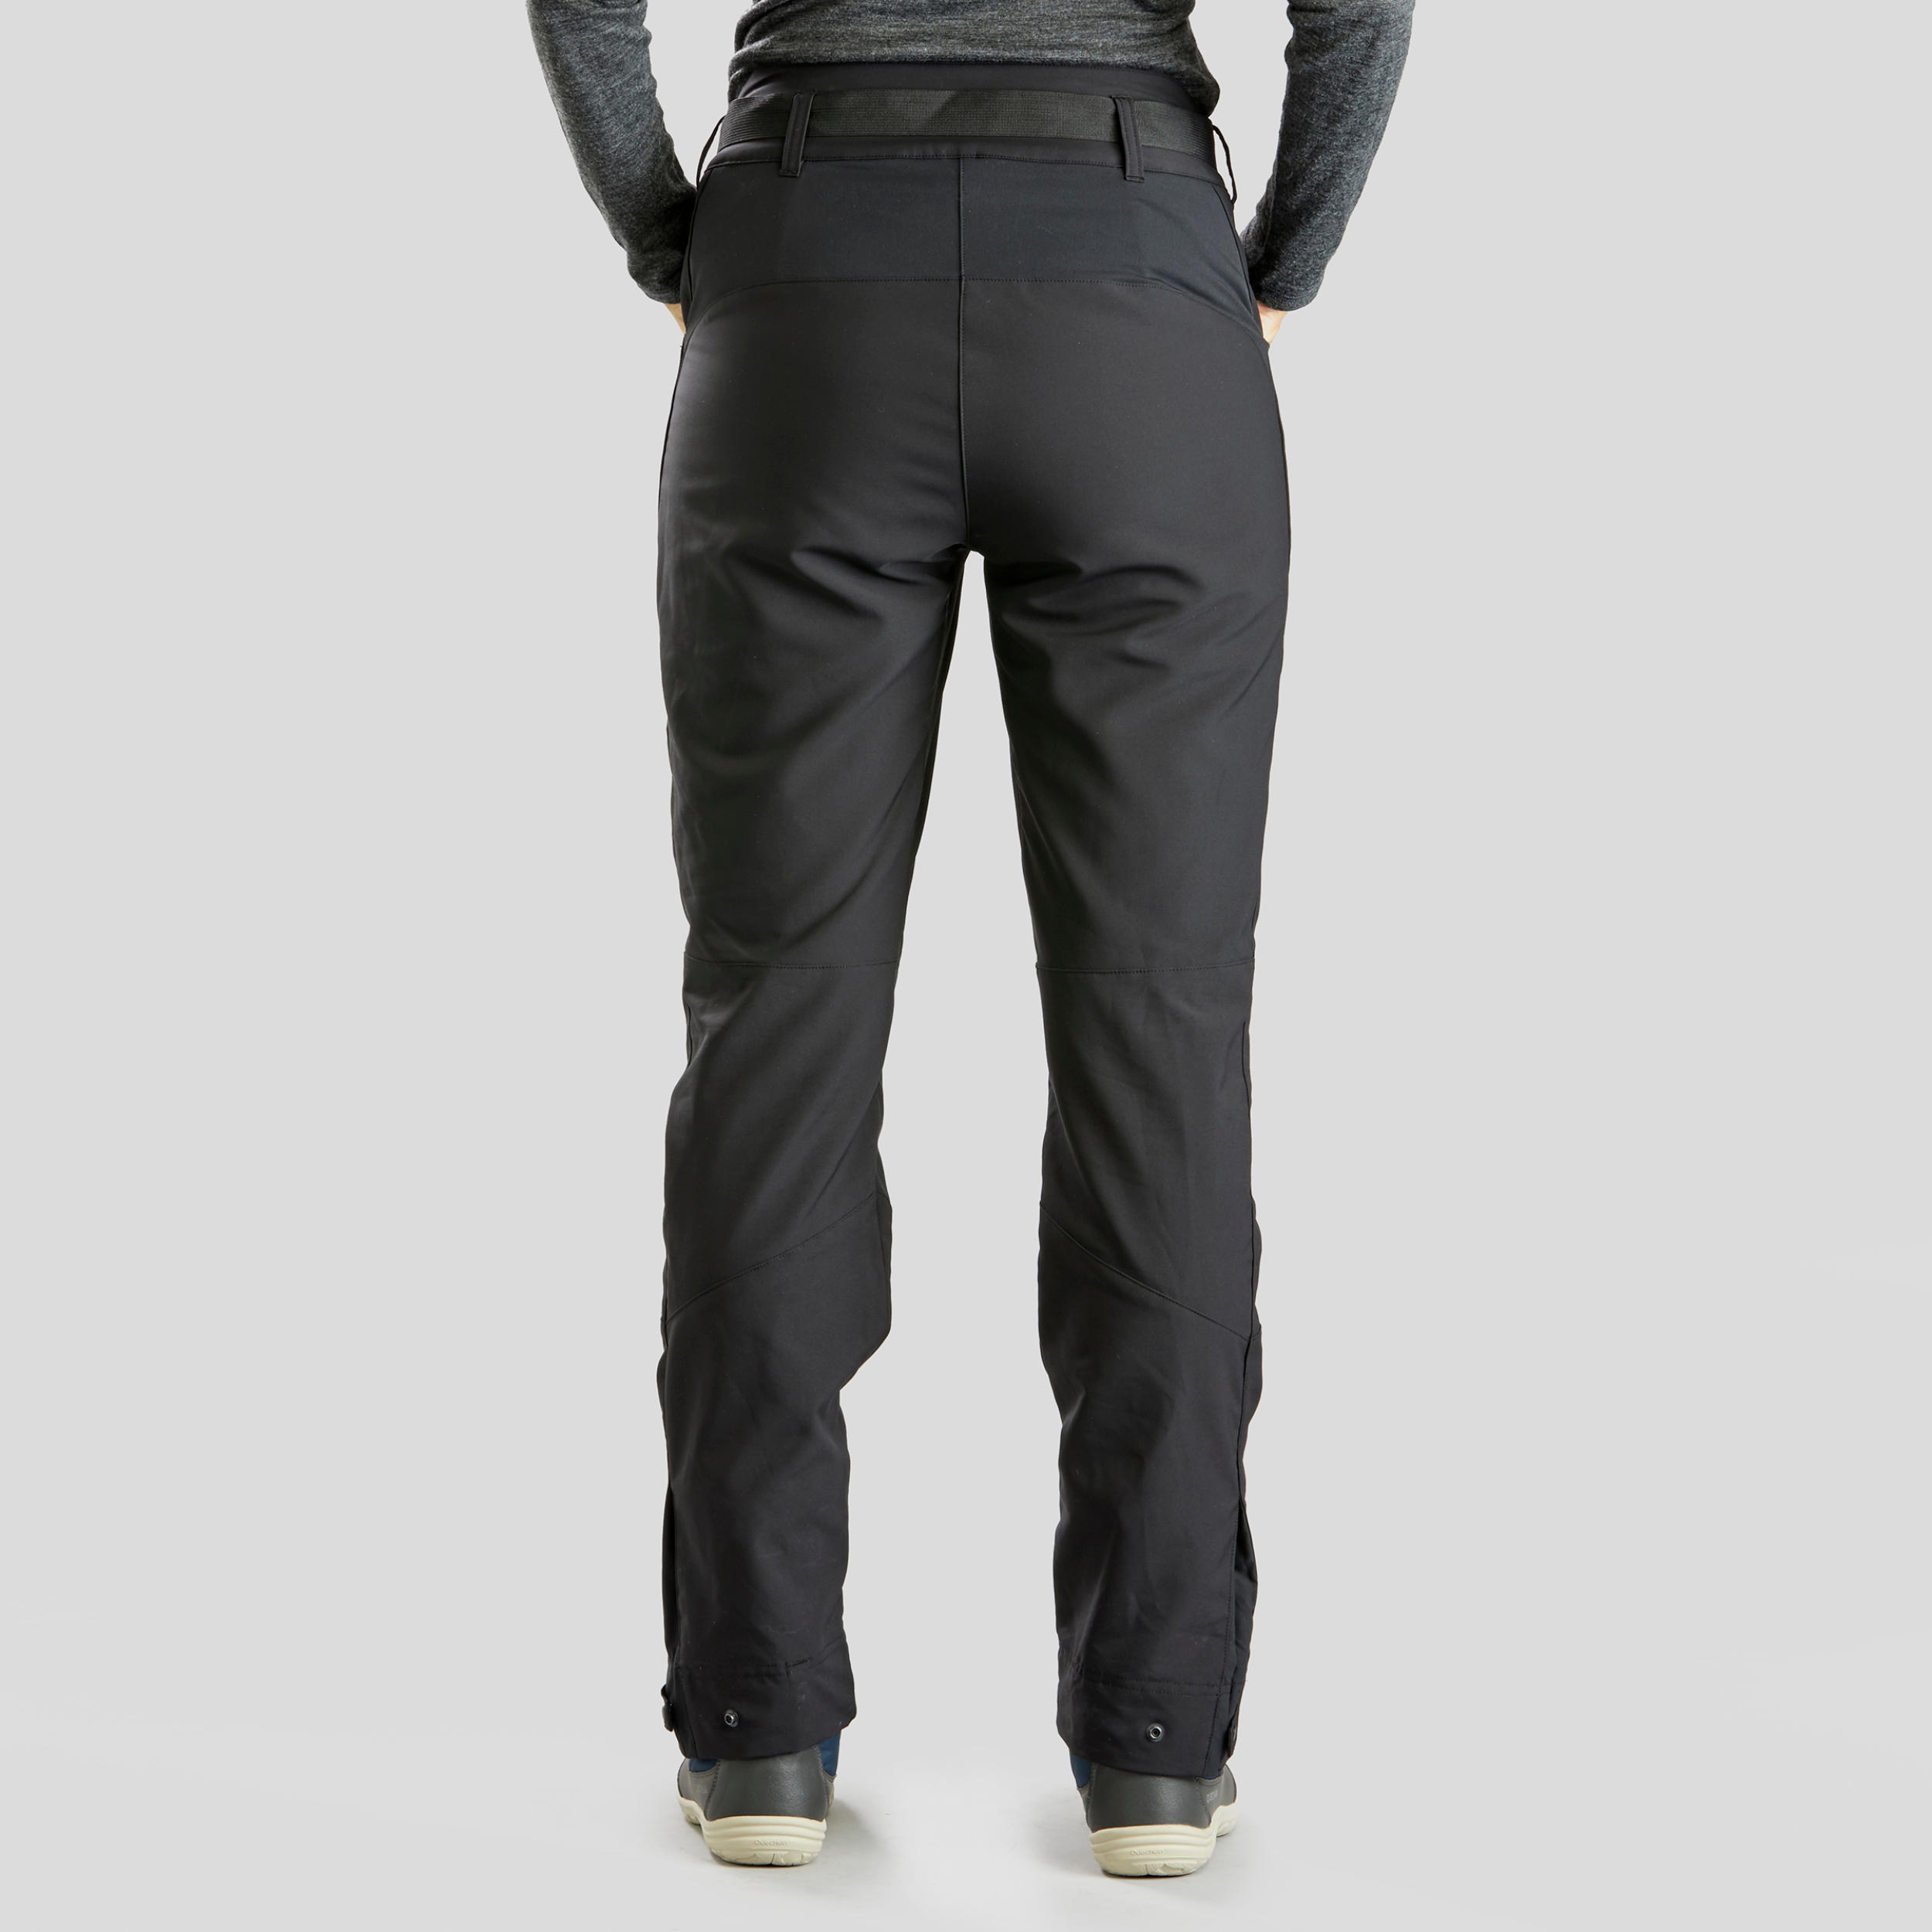 Decathlon Running Trousers Women (Quick Dry & Breathable) Athletic Pants -  Kalenji